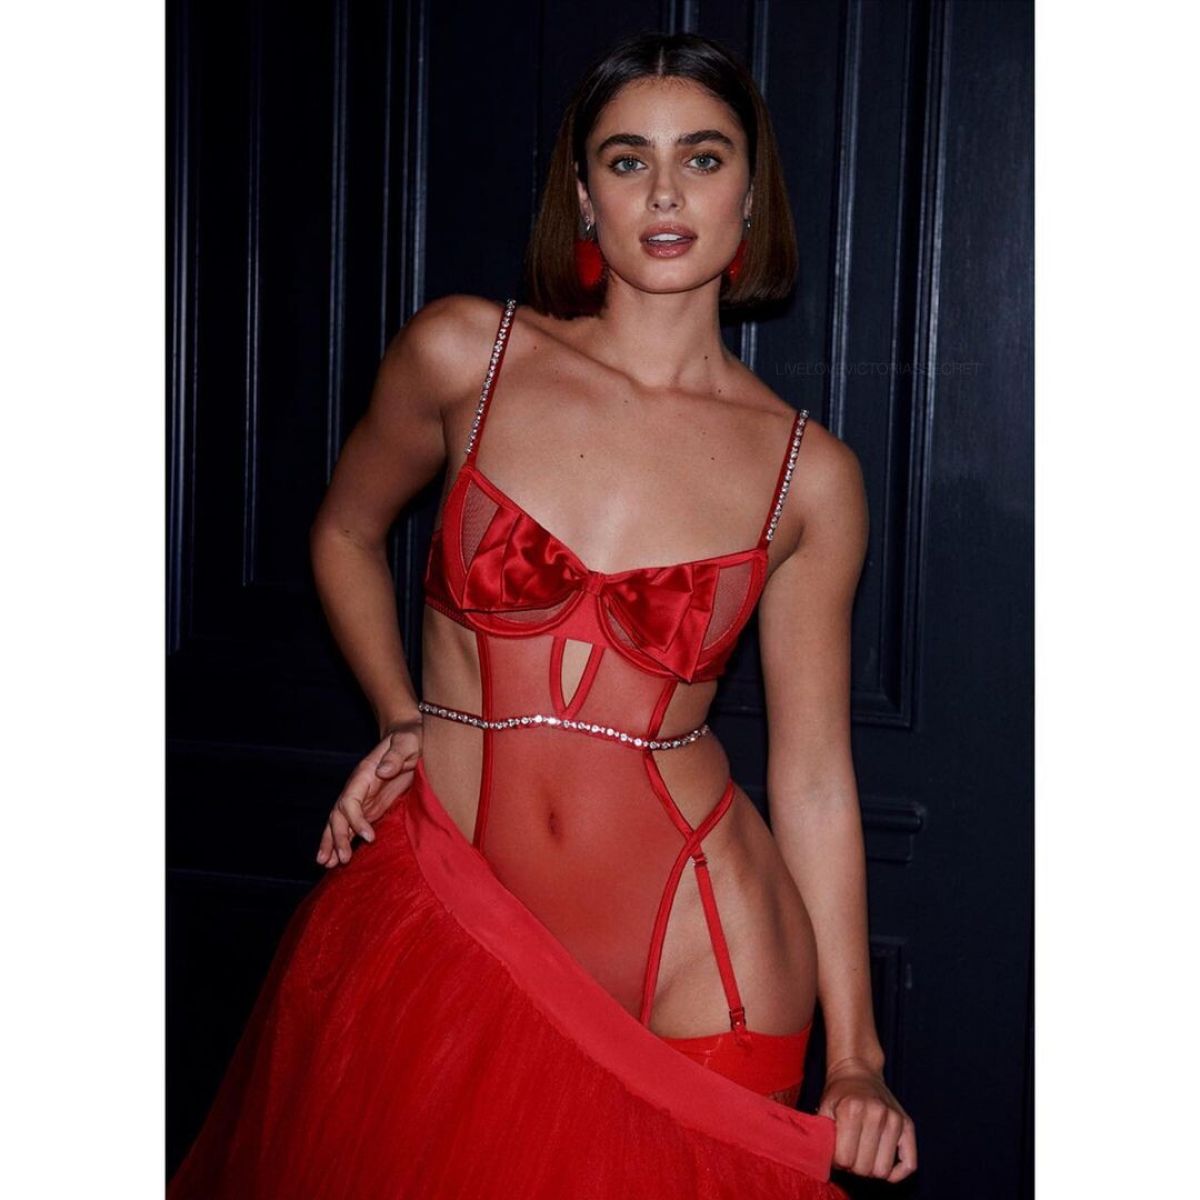 taylor-hill-for-victoria-s-secret-holiday-campaign-152-01-2020-3.jpg